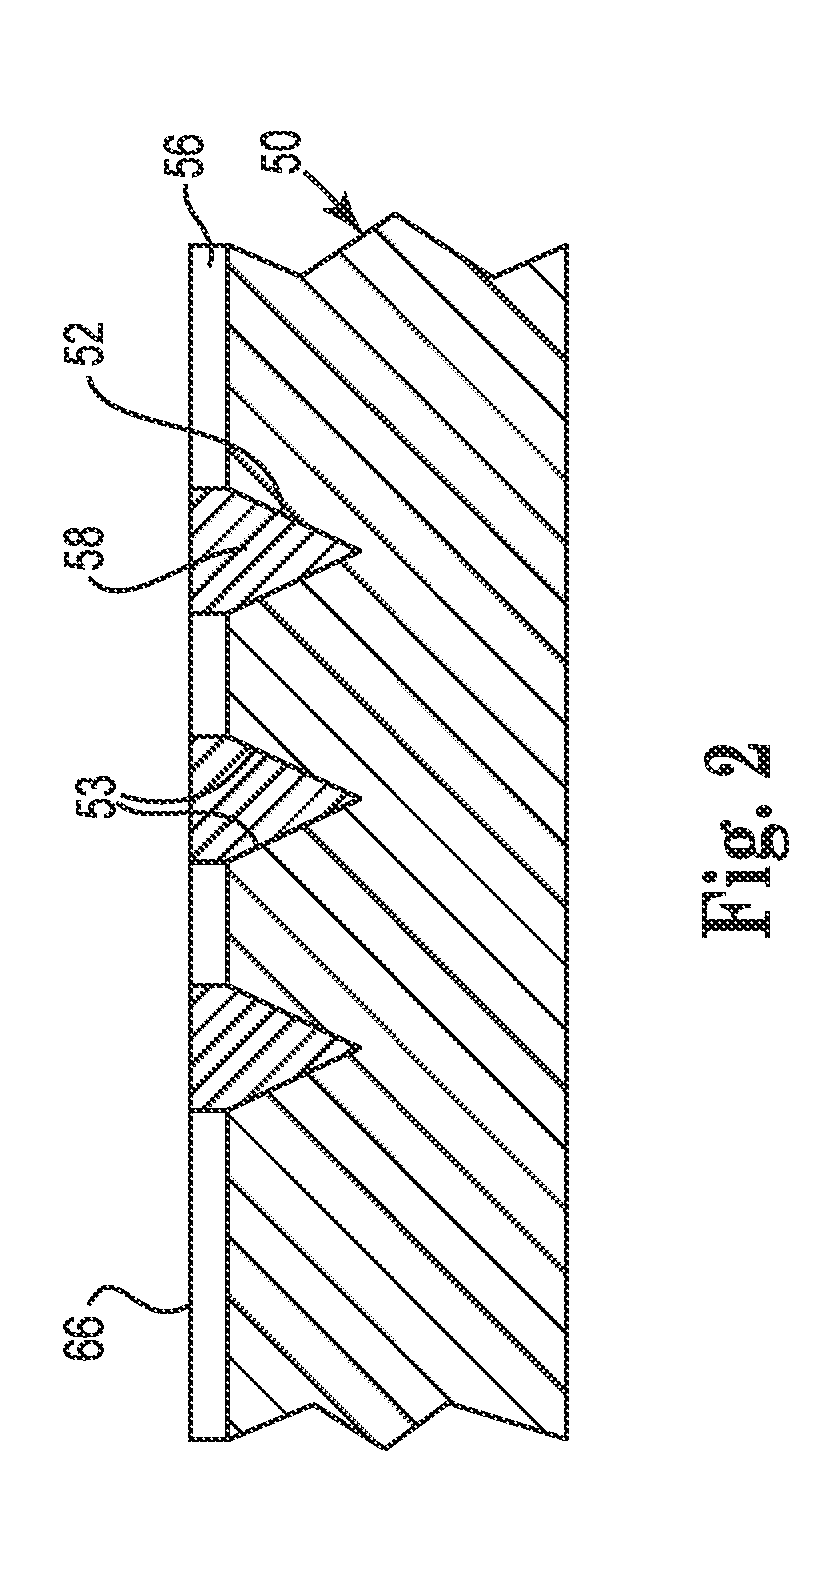 Singulated semiconductor device separable electrical interconnect